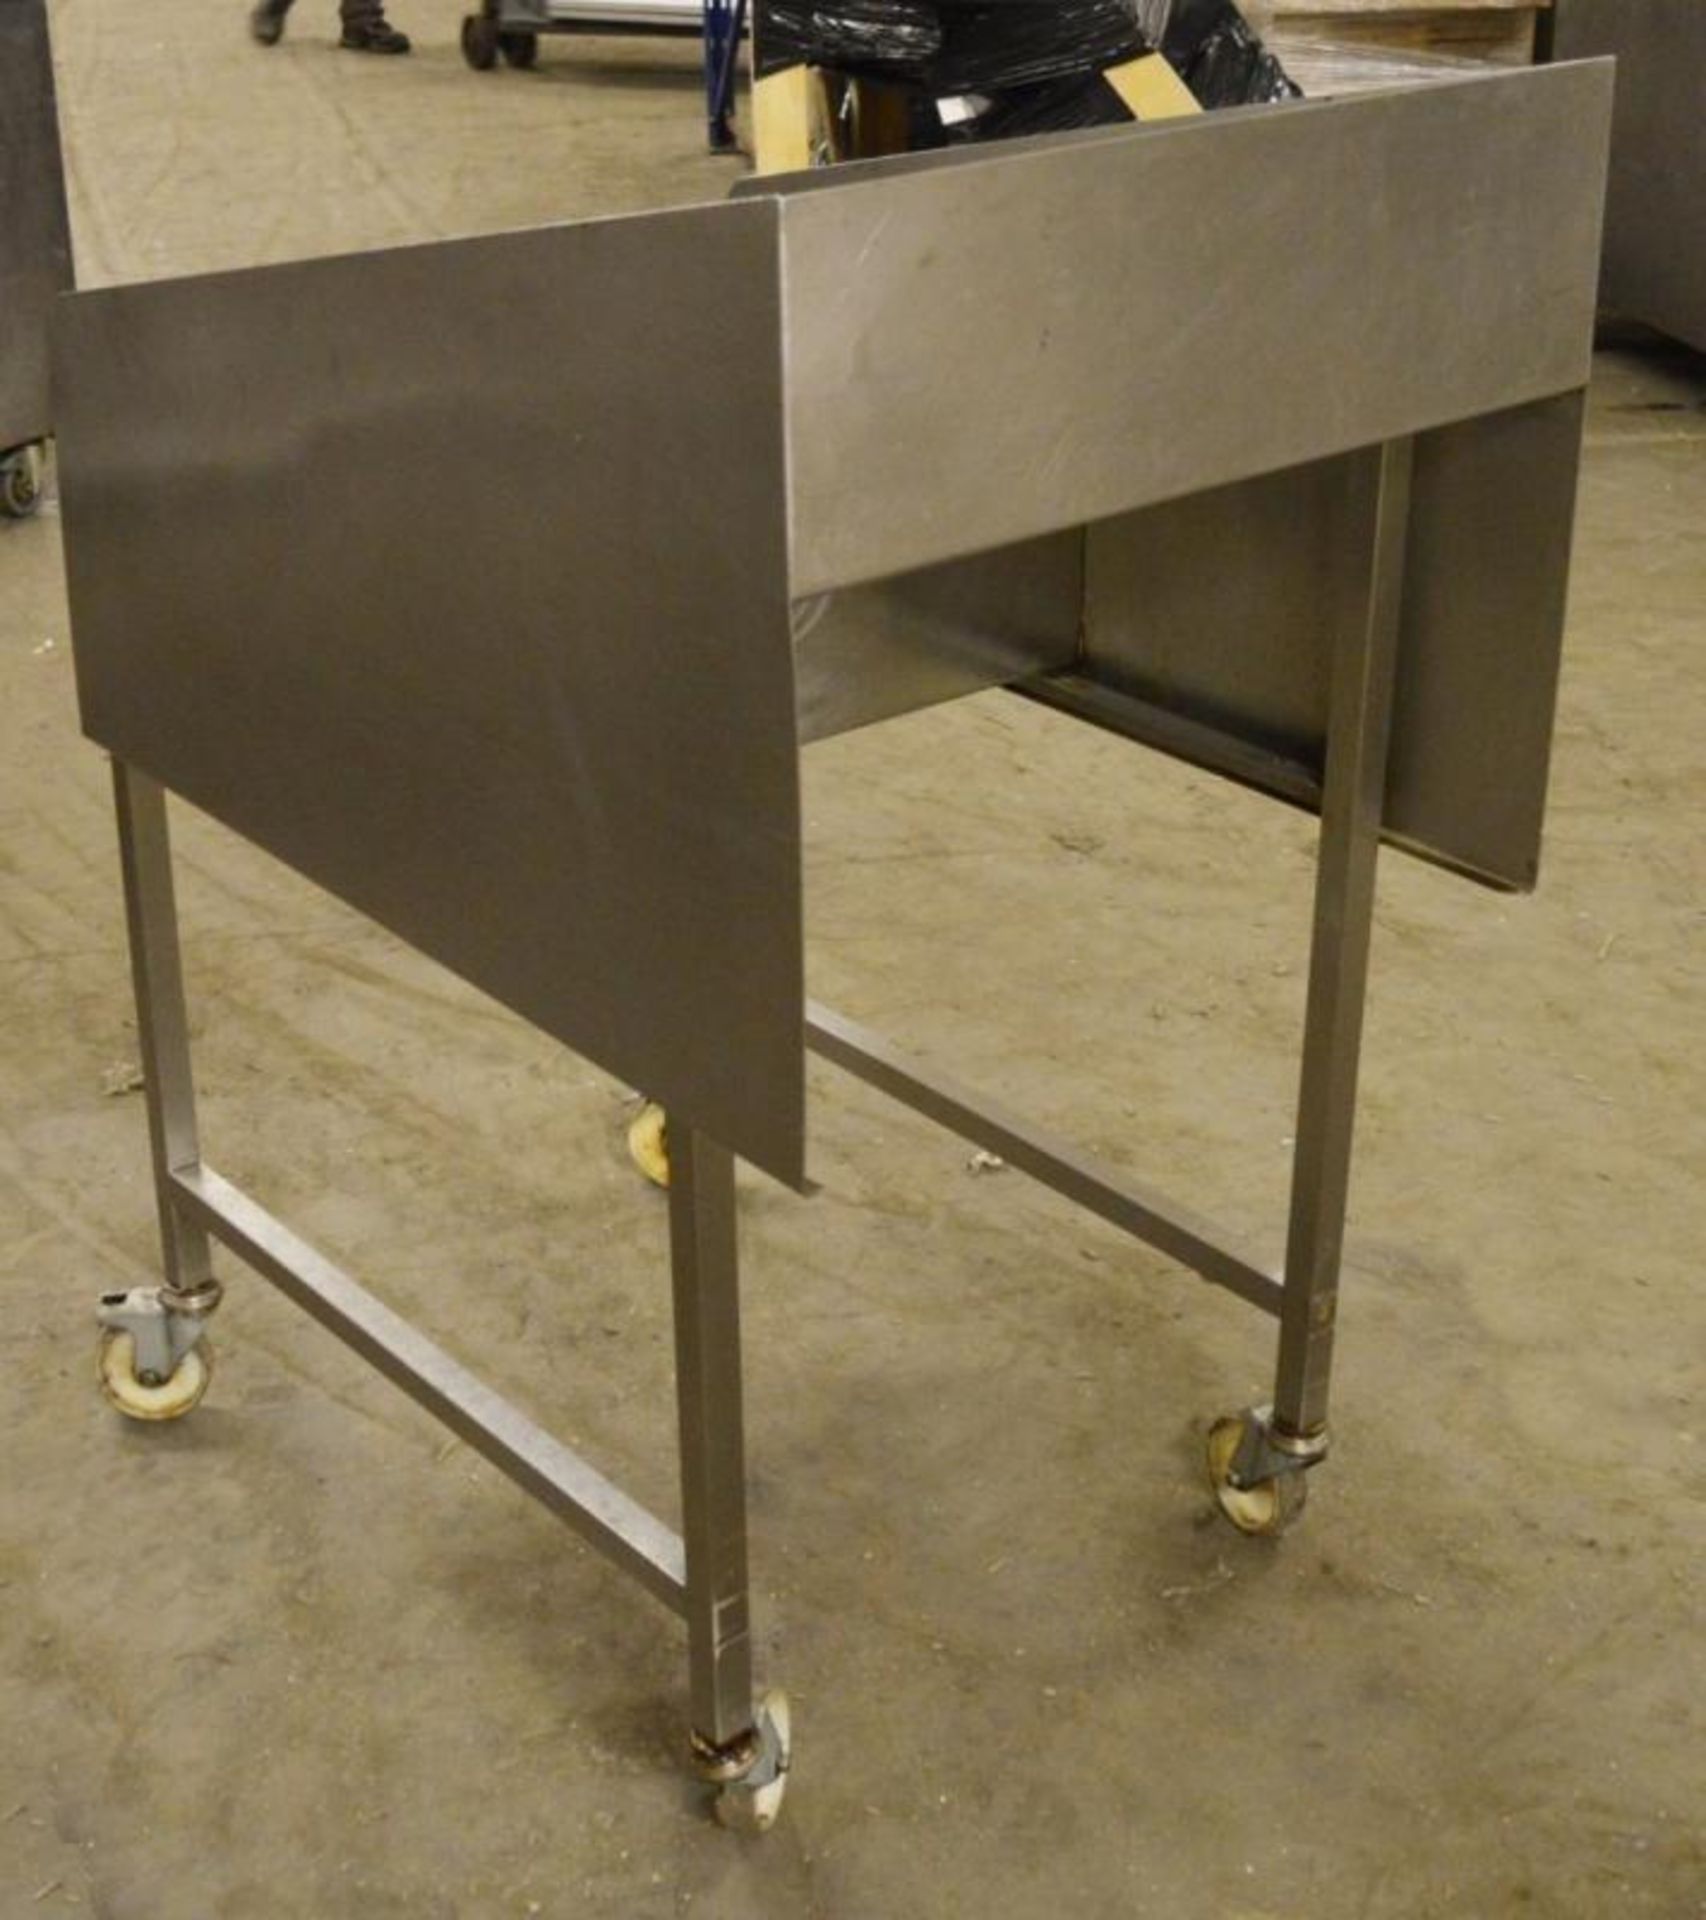 1 x Stainless Steel Commercial Waste Bench - Two Tier Waste Chute on Castors - H114 x W62.5 x D90 cm - Image 5 of 5